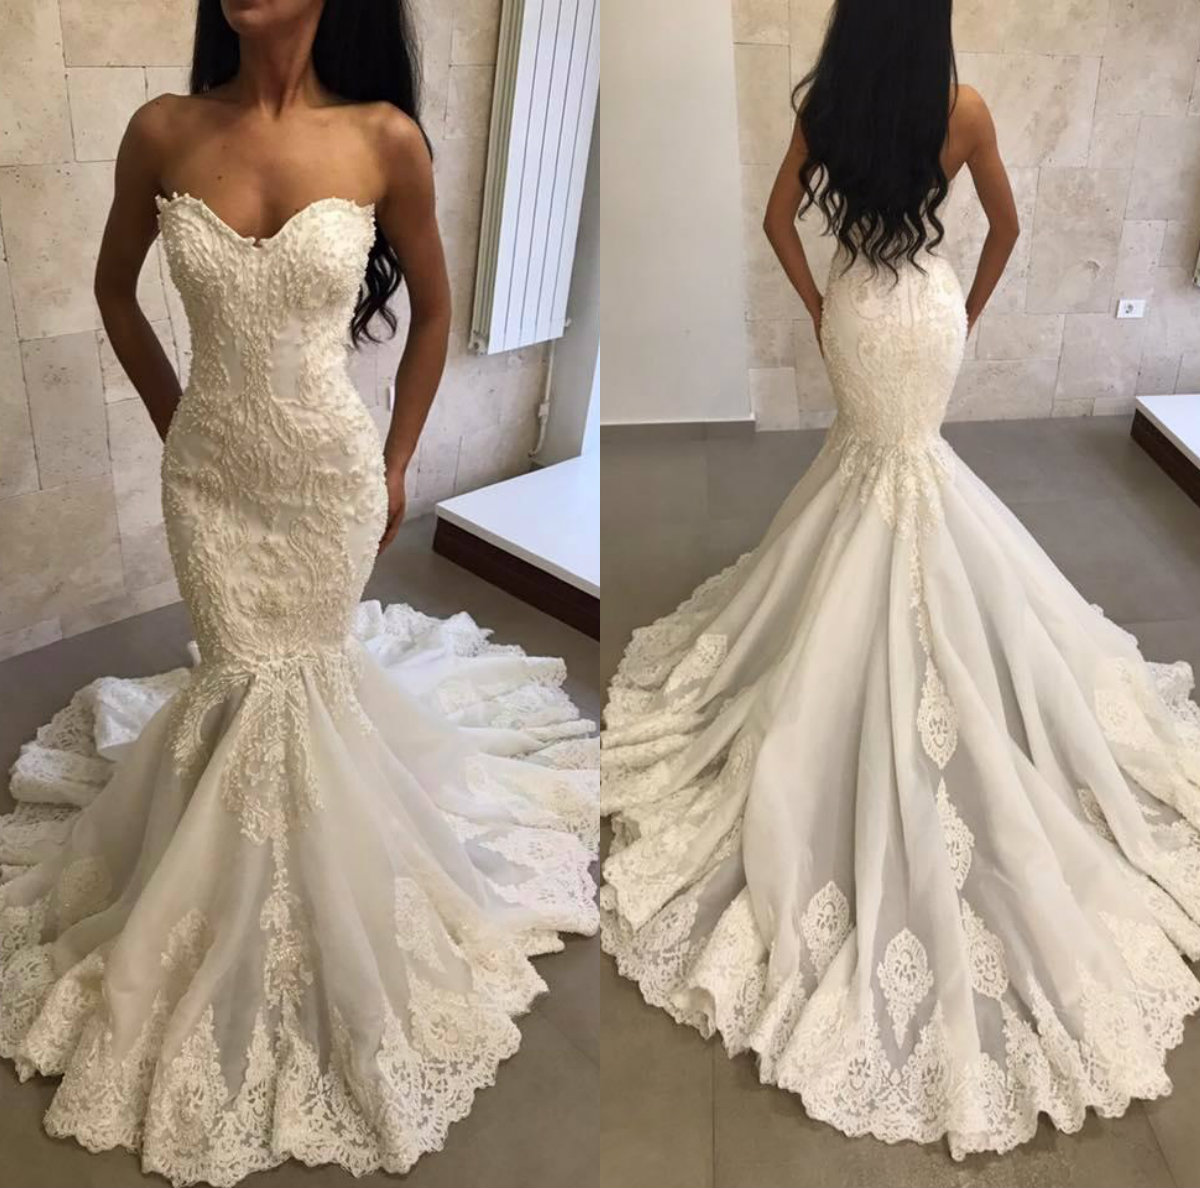 

2019 Beaded Mermaid Wedding Dresses Sweetheart Lace Appliques Sweep Train Country Wedding Dress Vintage Beach Bridal Gowns Plus Size, Custom made from color chart